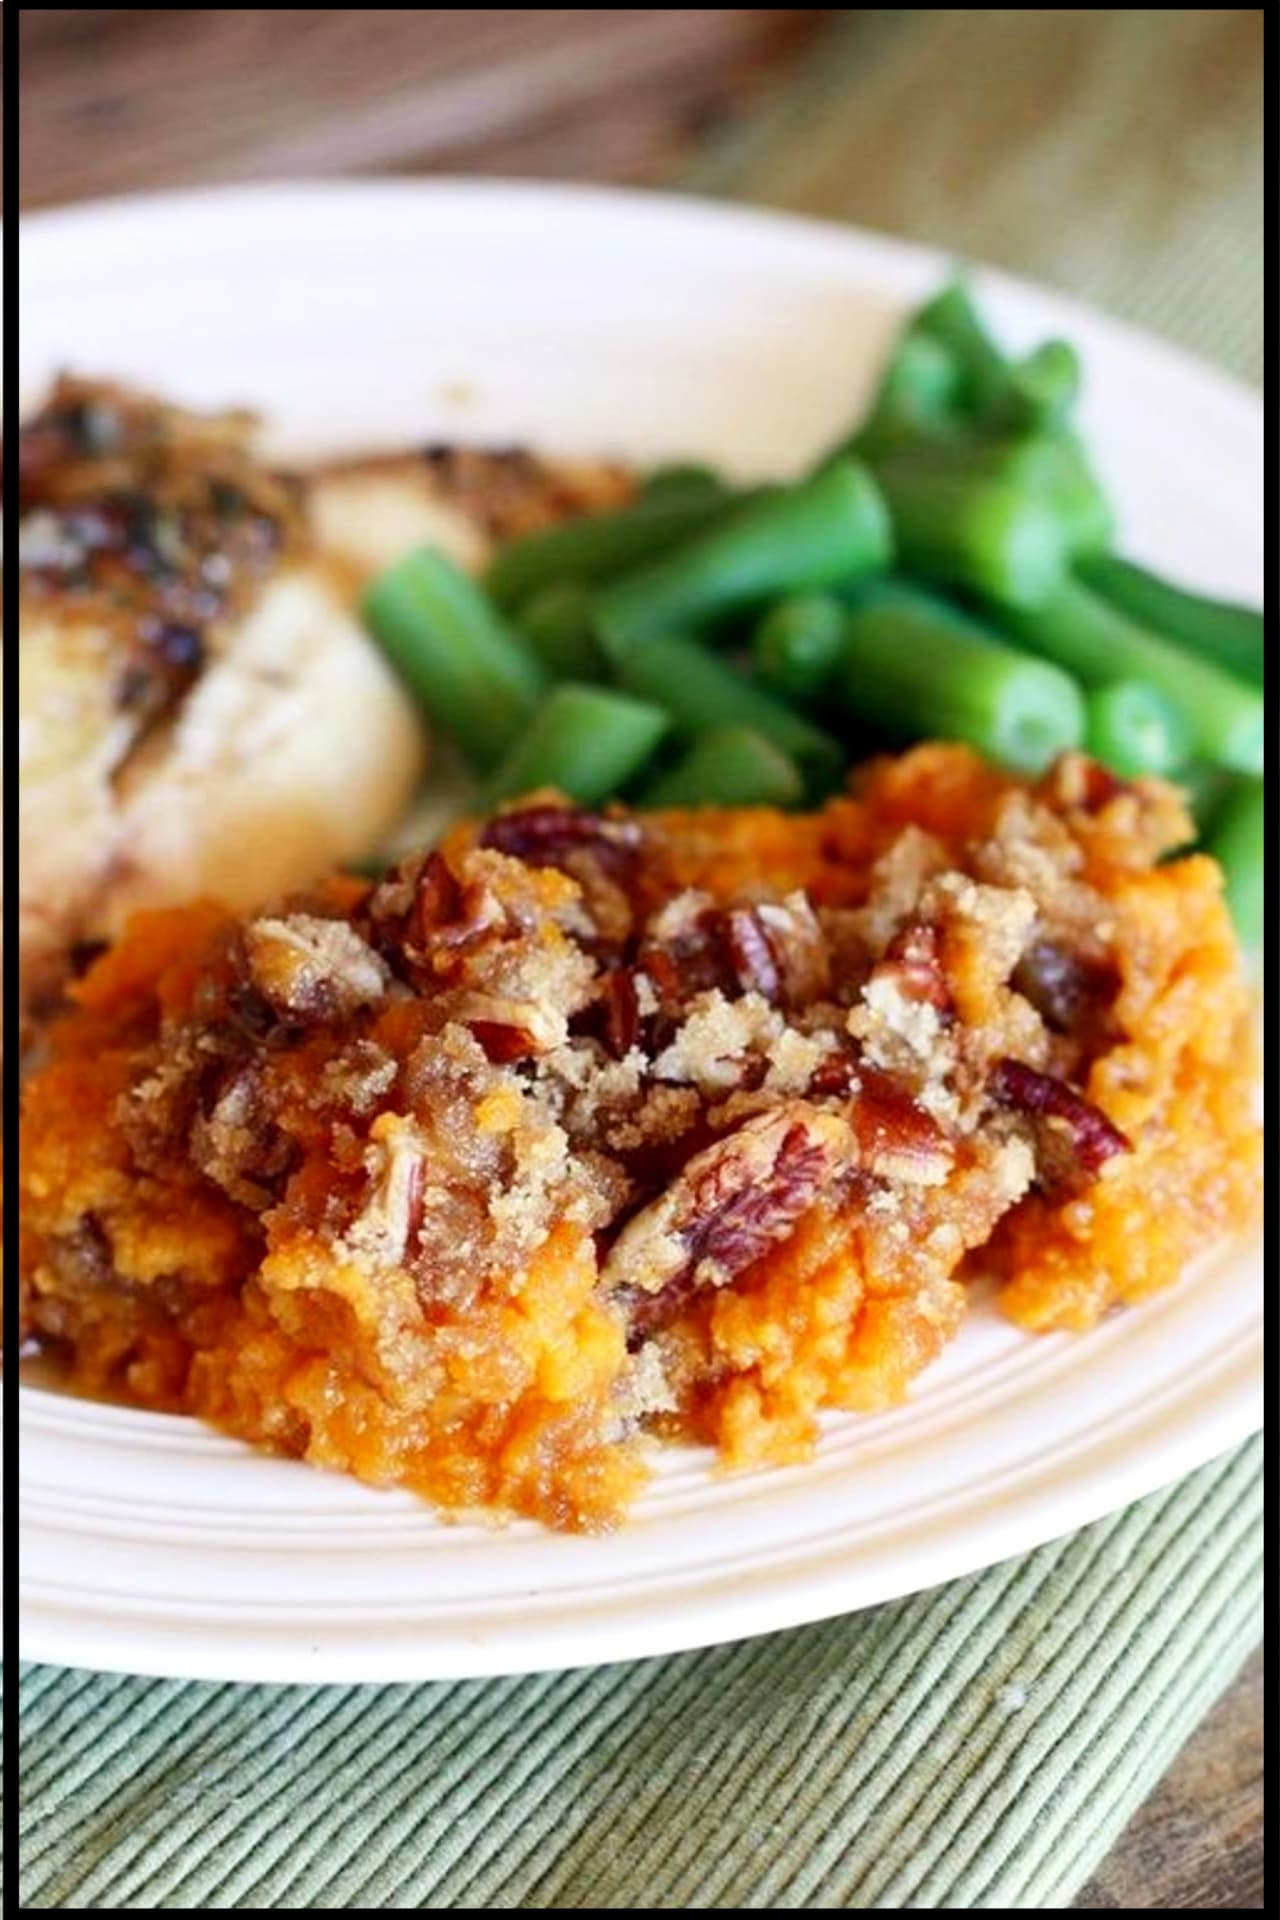 Thanksgiving Side Dishes for a crowd - easy thanksgiving vegetable side dishes and thansgiving side dishes make ahead recipes - colorful thanksgiving side dishes too.  These sweet potatoes thanksgiving side dishes are one the of Top 10 Thanksgiving sides